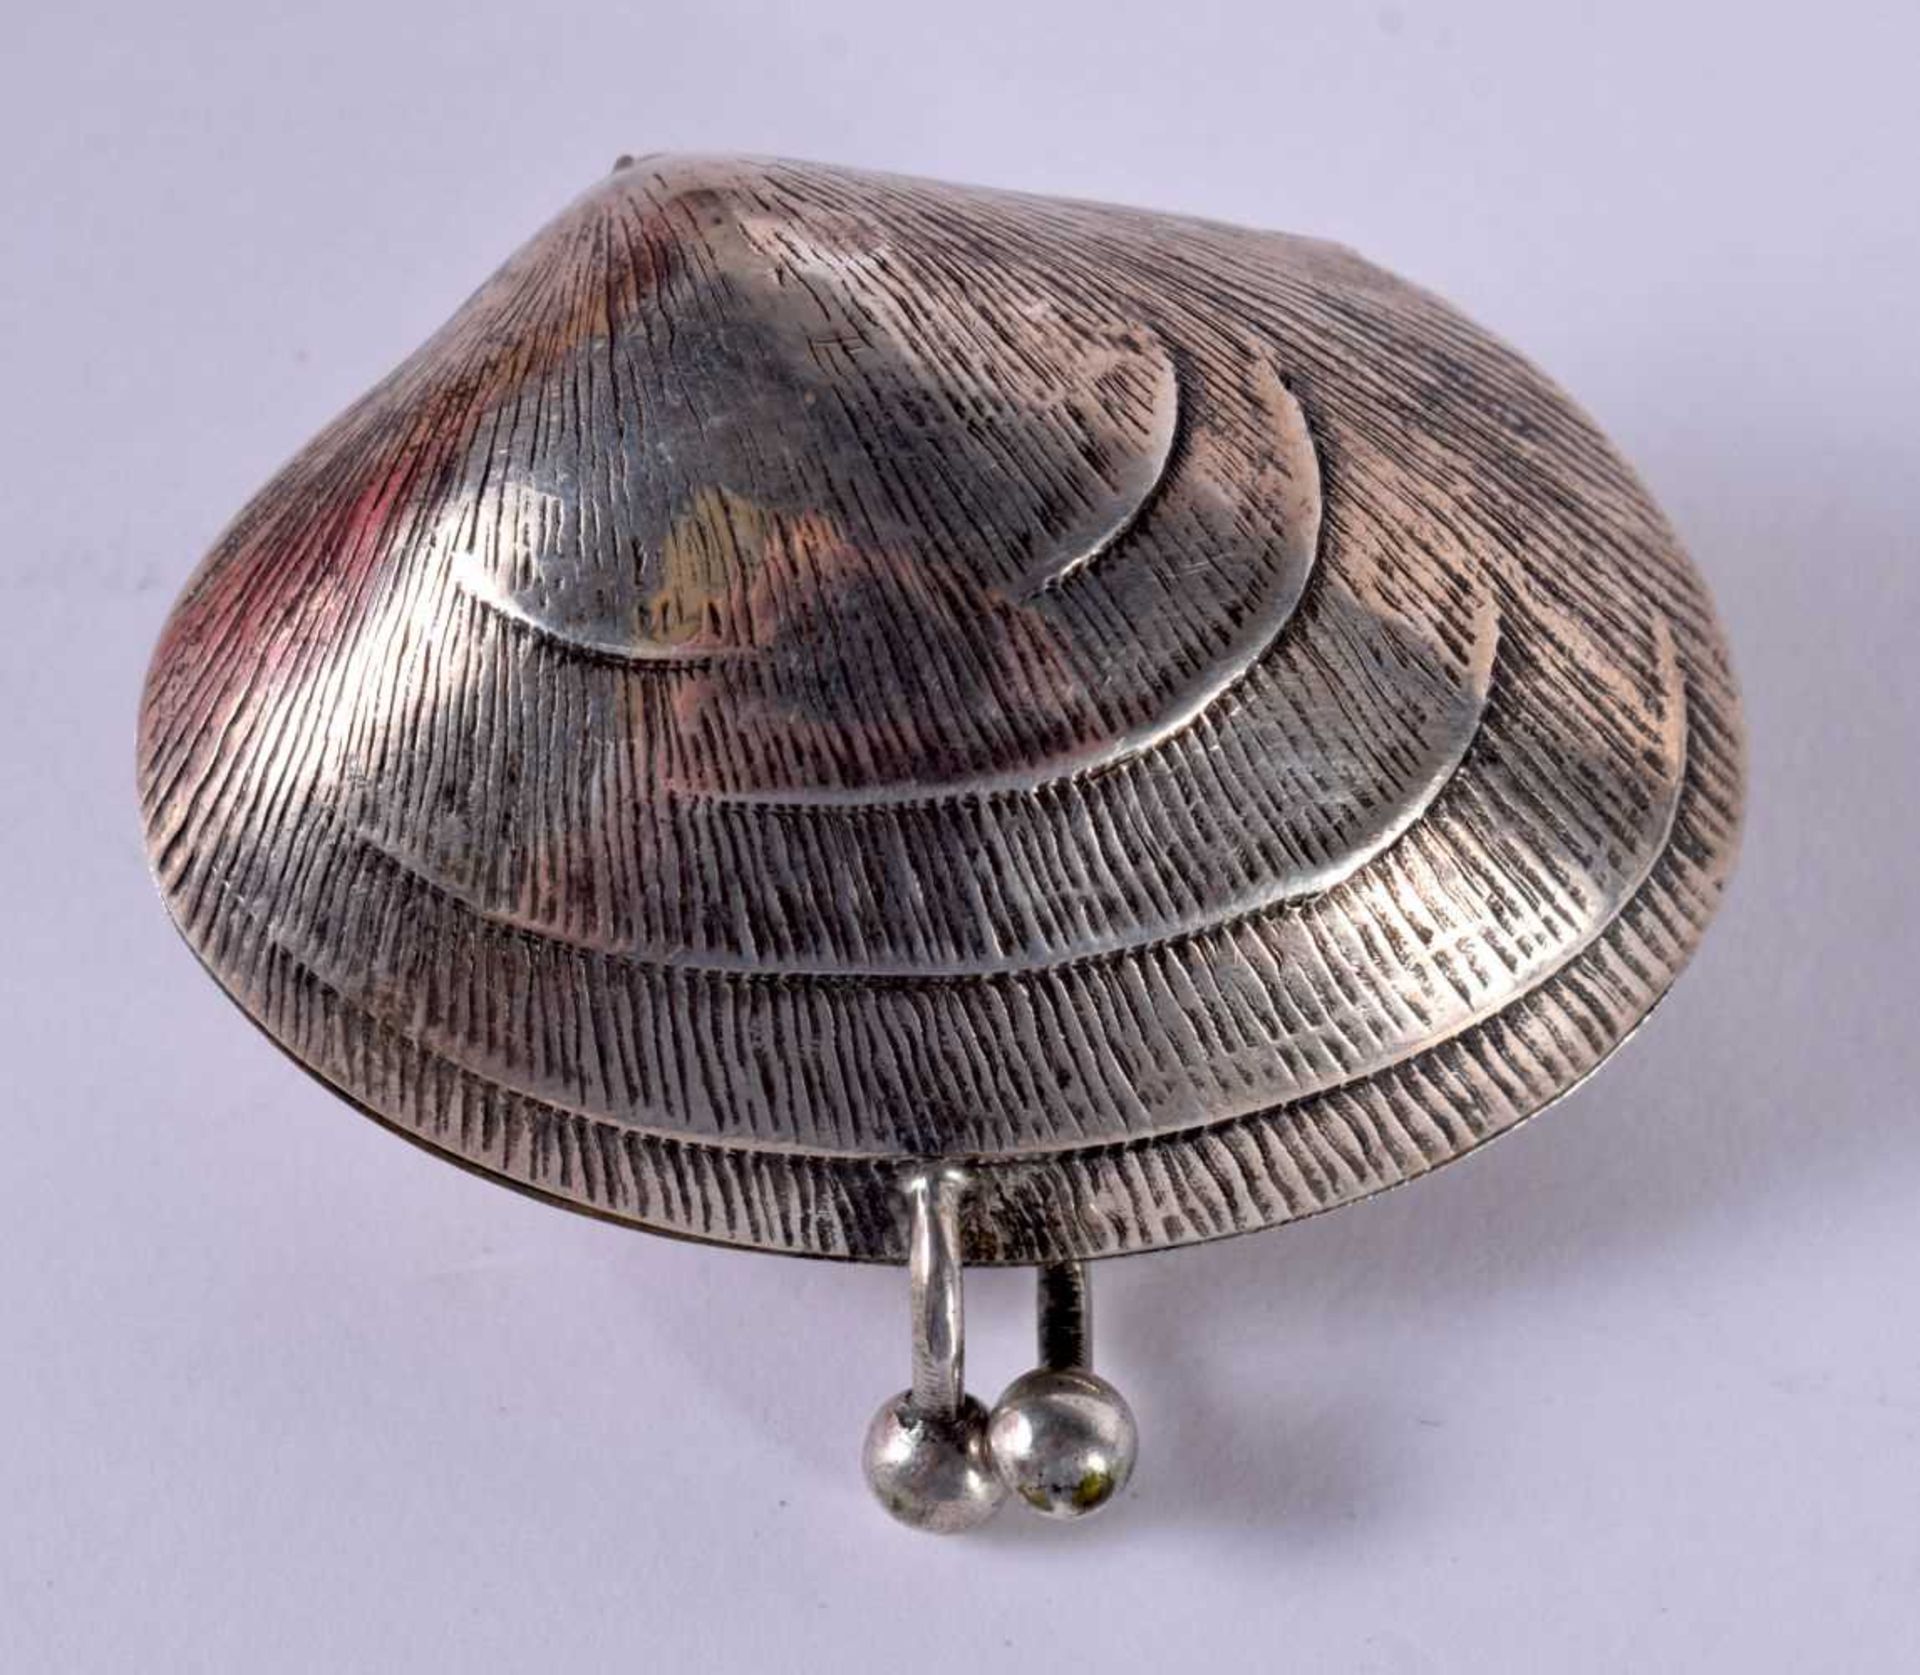 A CONTINENTAL SILVER SNUFF BOX WITH GILT INTERIOR IN THE FORM OF A CLAM SHELL. 2.6 cm x 5.4cm x 4.